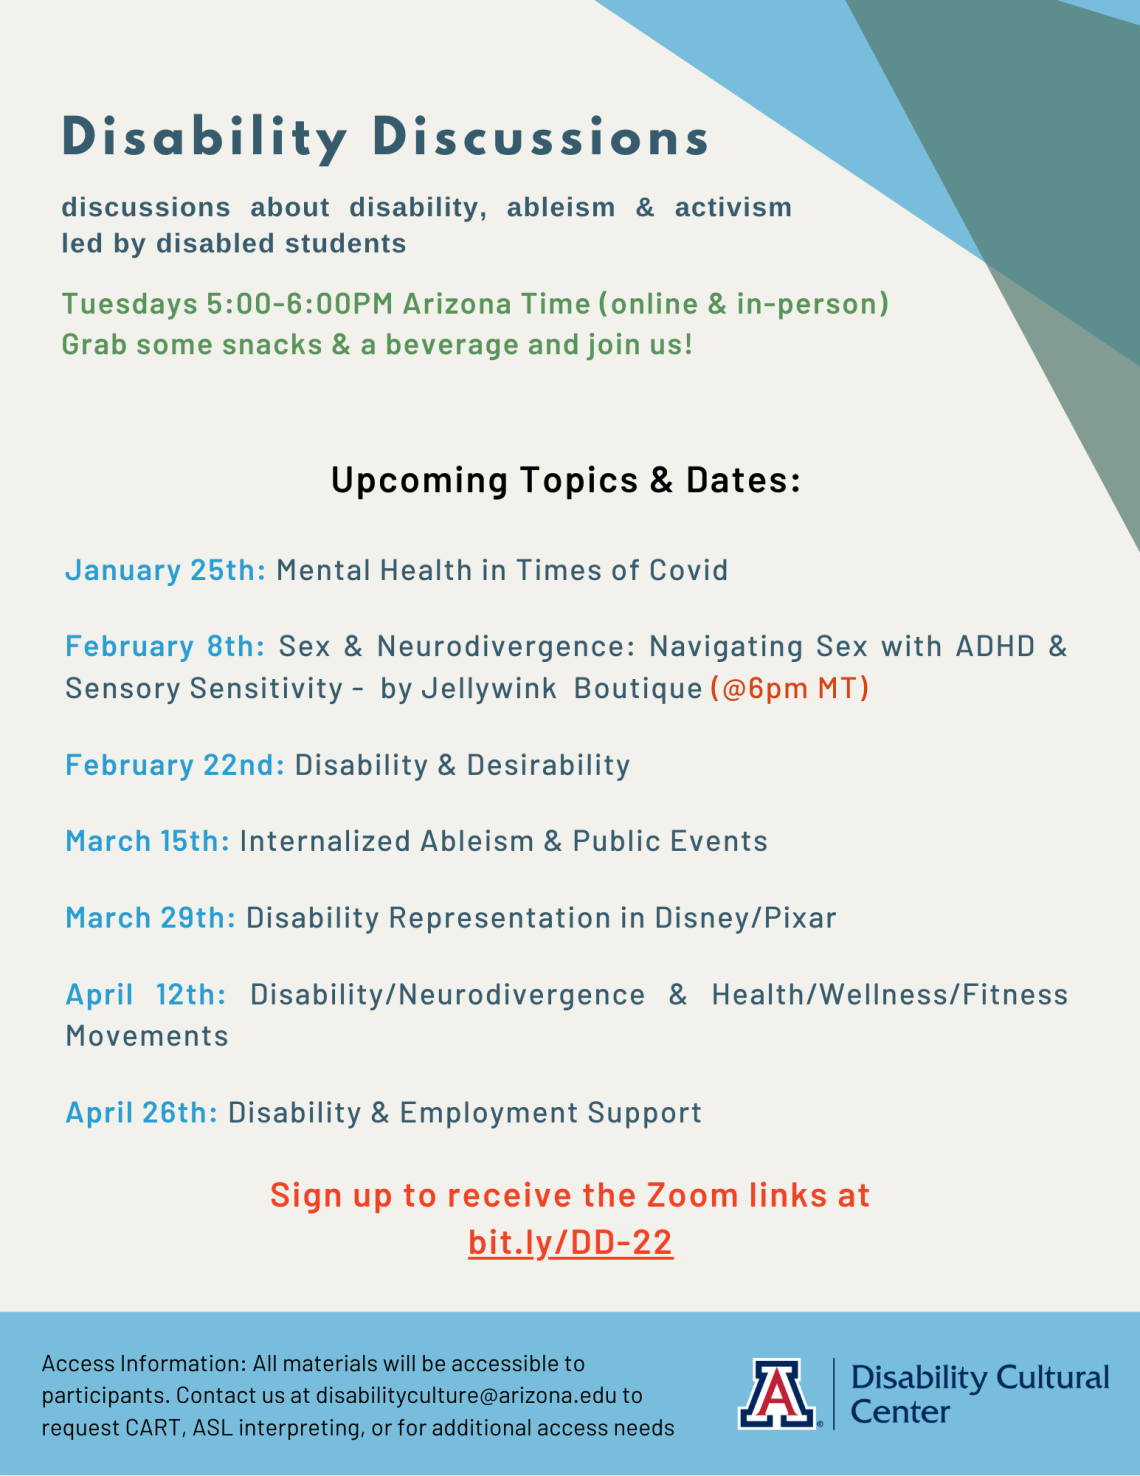 Flyer for Spring 22 Disability Discussions